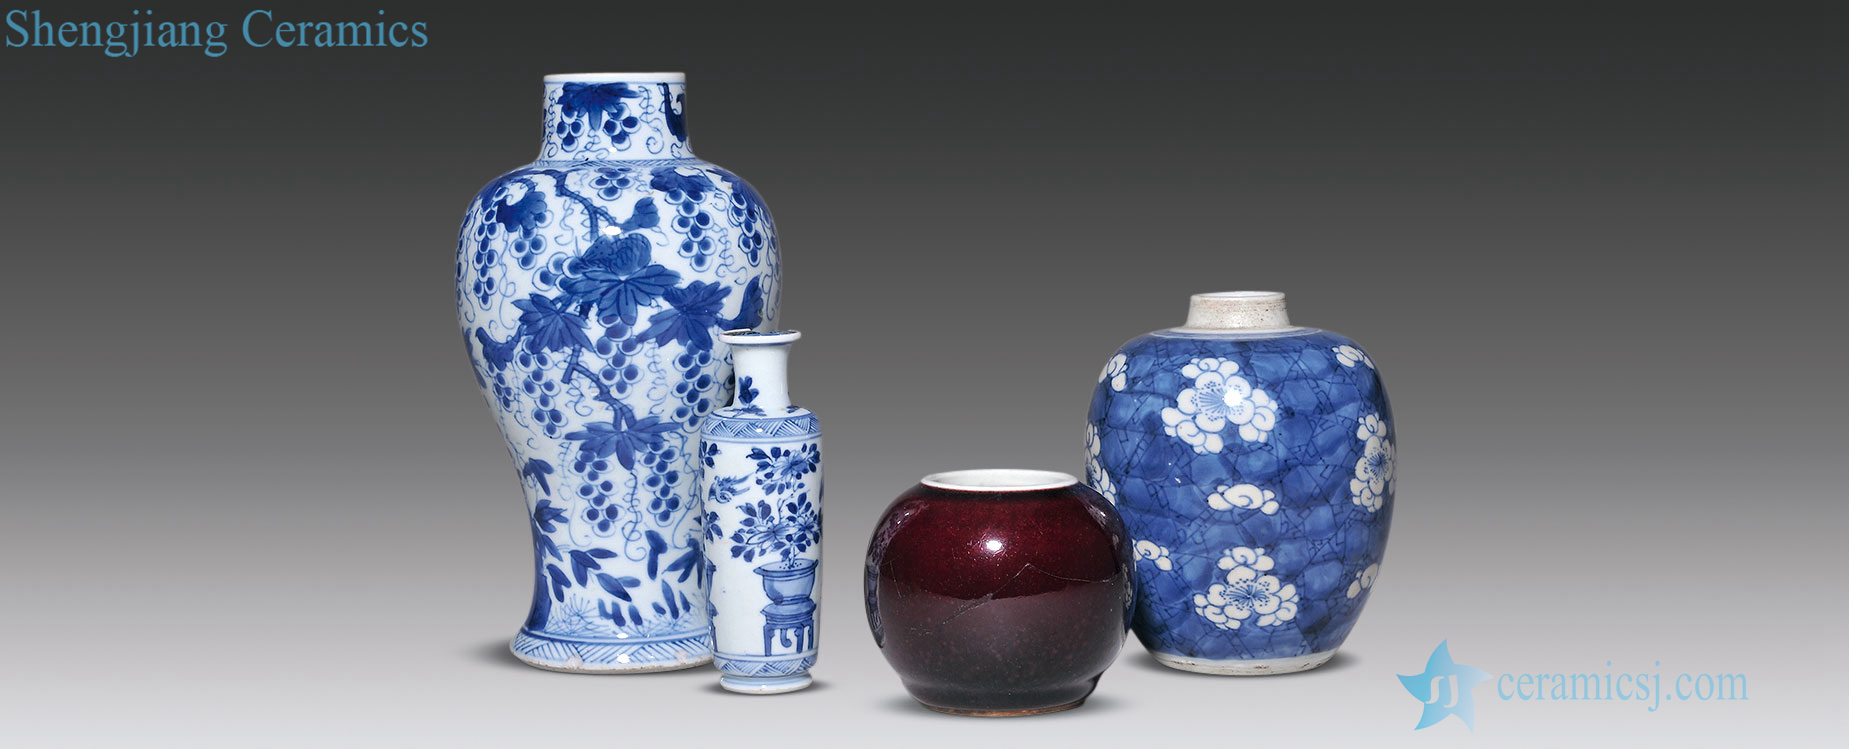 Blue and white, red glaze porcelain of the reign of emperor kangxi (four pieces)